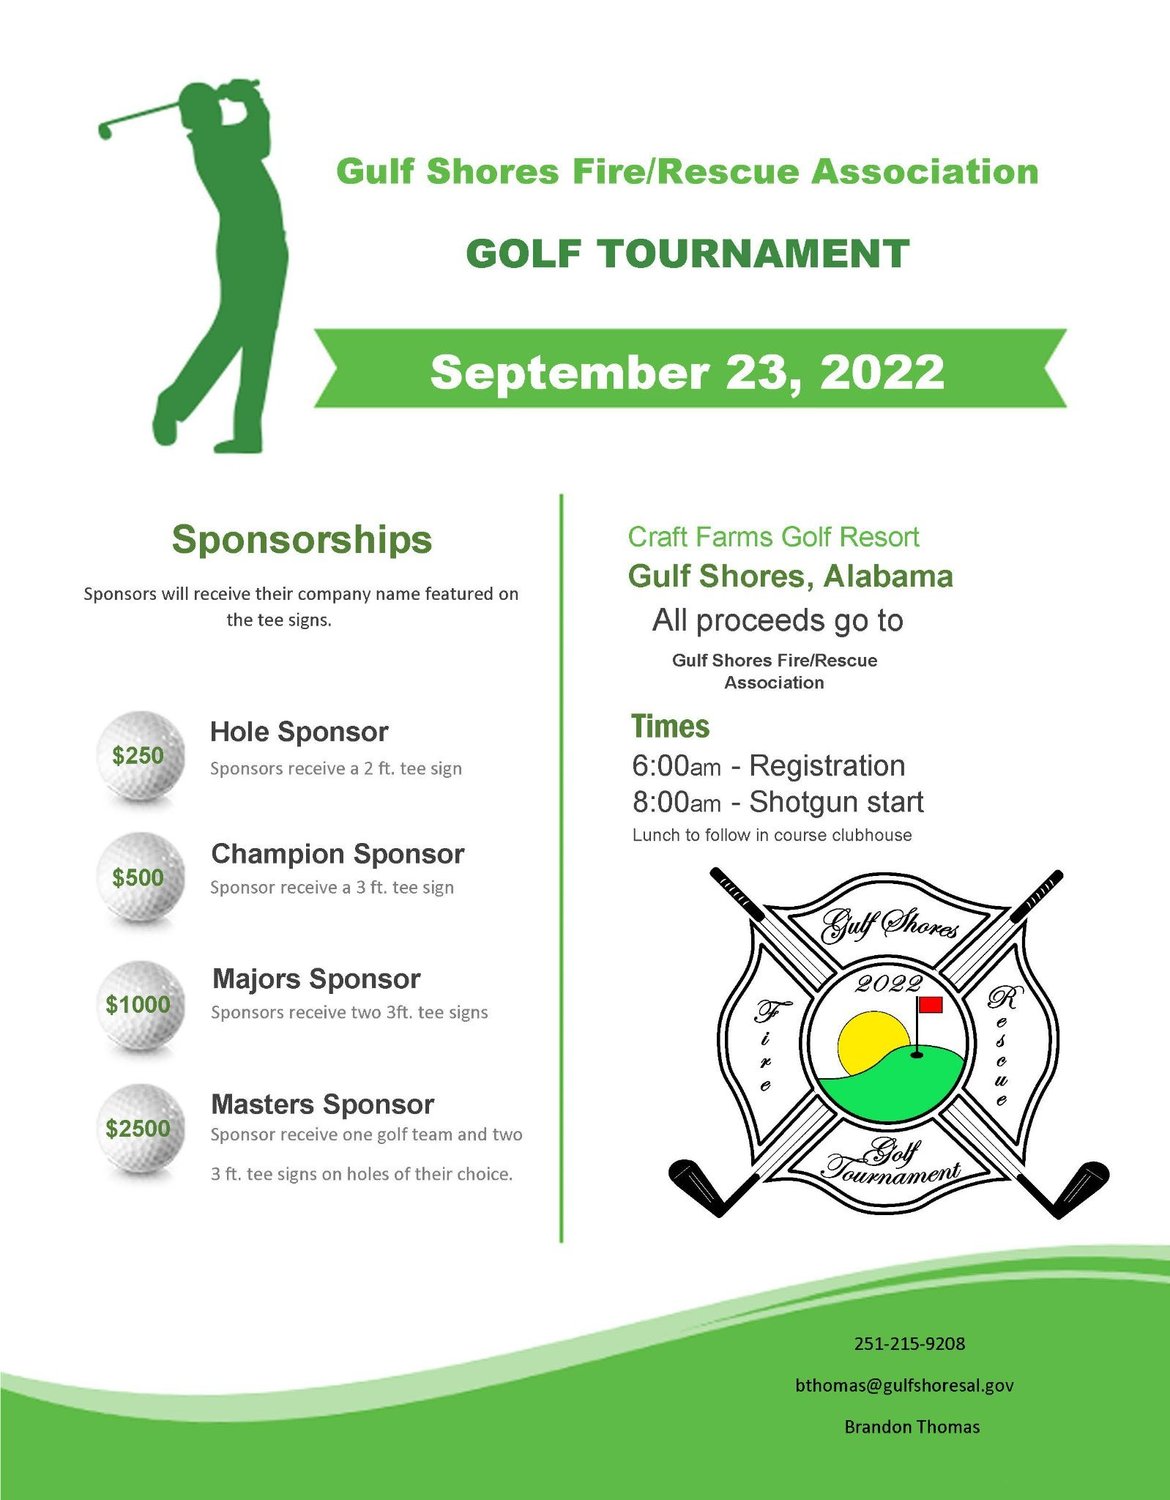 Wondering how you can help? Become a sponsor for the Gulf Shores Fire/Rescue Association's second annual Golf Tournament Sept. 23 or put together a four-person team to play. Contact Brandon Thomas at bthomas@gulfshoresal.gov or (251) 215-9208